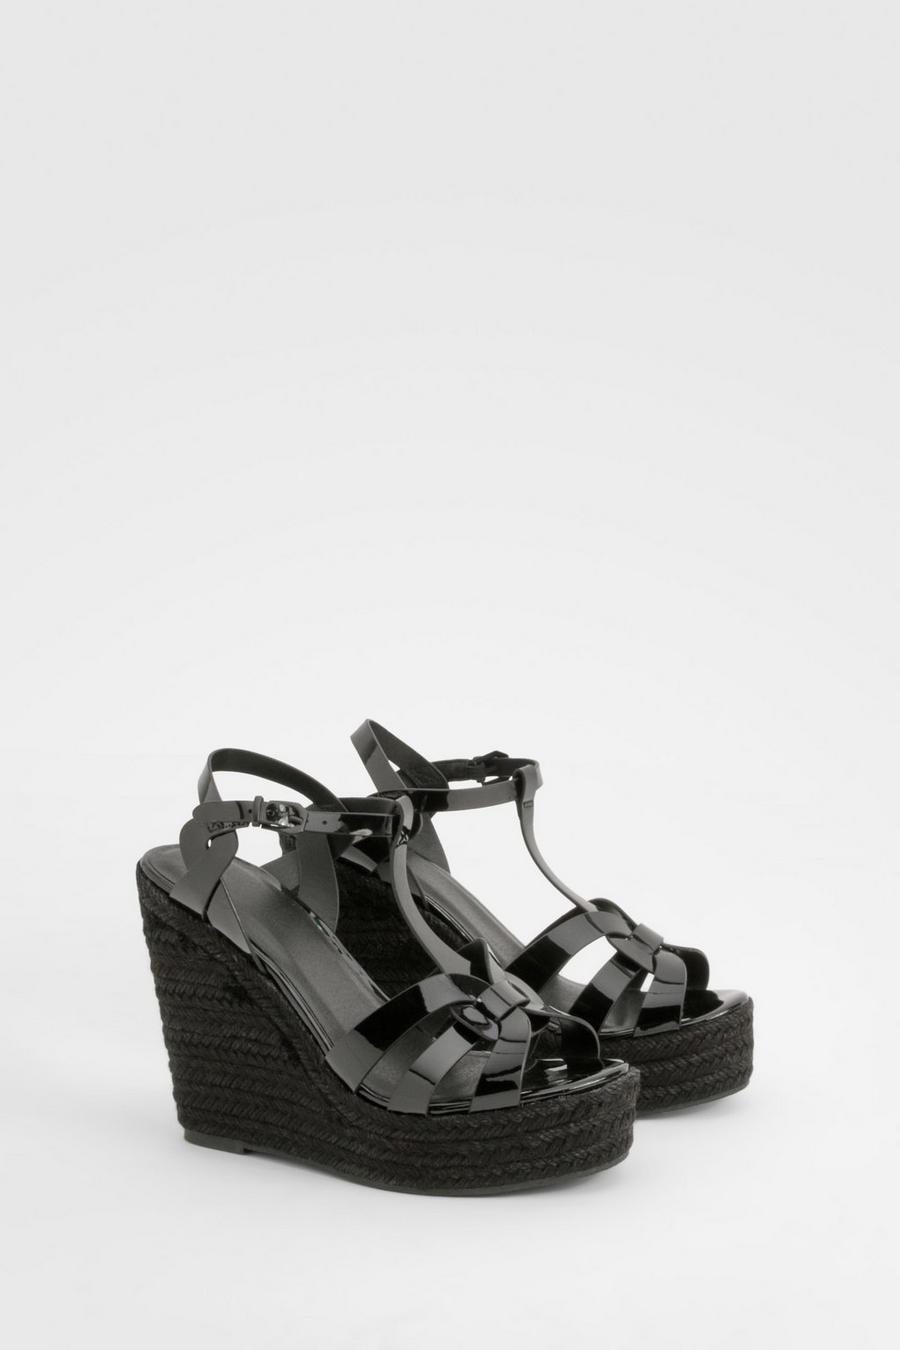 Black Strappy Front Patent Wedges